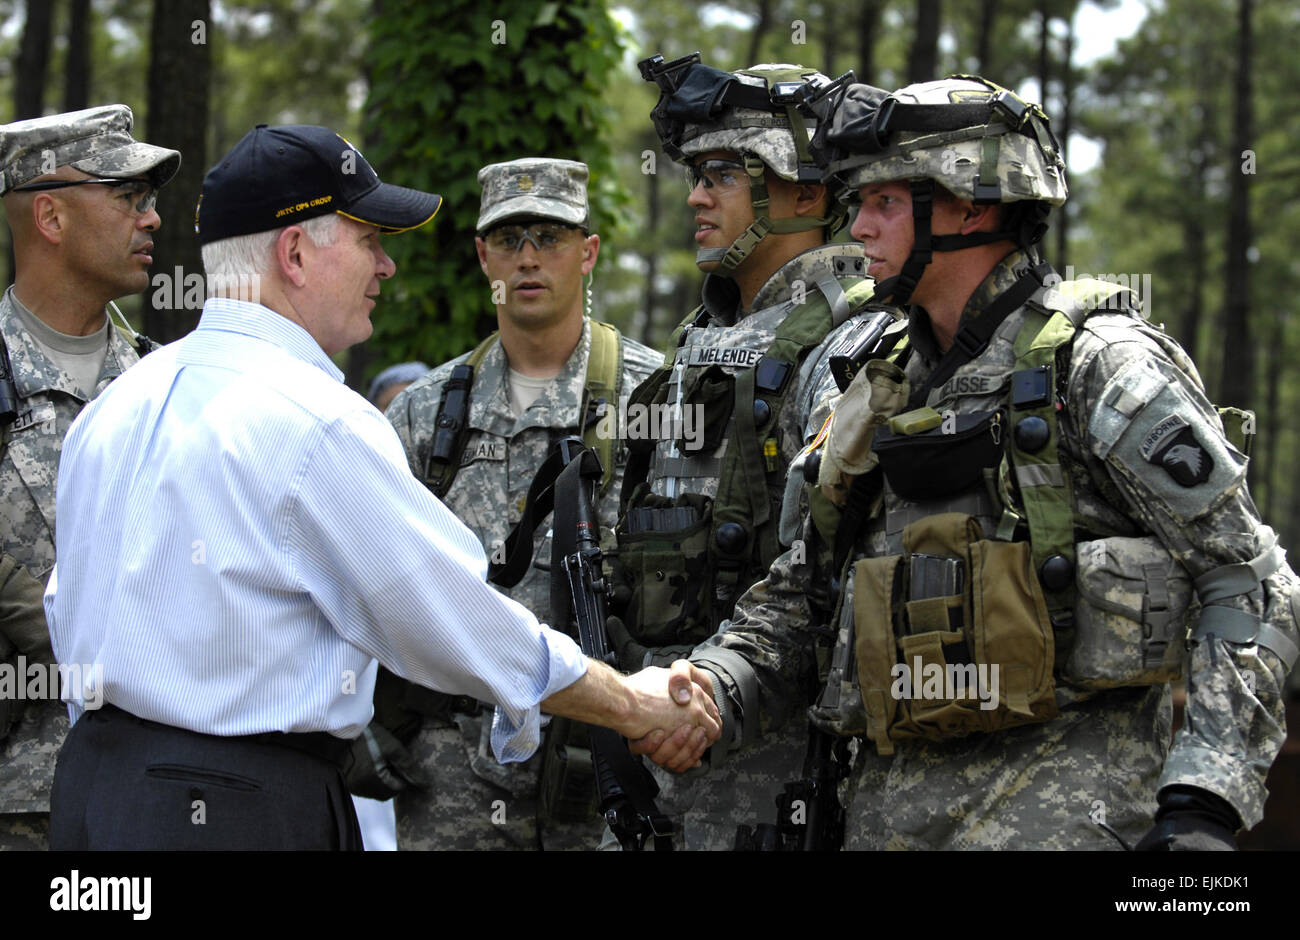 Secretary of Defense Robert M. Gates meets with troops after observing their field training at the Joint Readiness Training Center at Fort Polk, La., May 4, 2007.  The training is designed to prepare troops for situations they may encounter while deployed.   Cherie A. Thurlby. Stock Photo